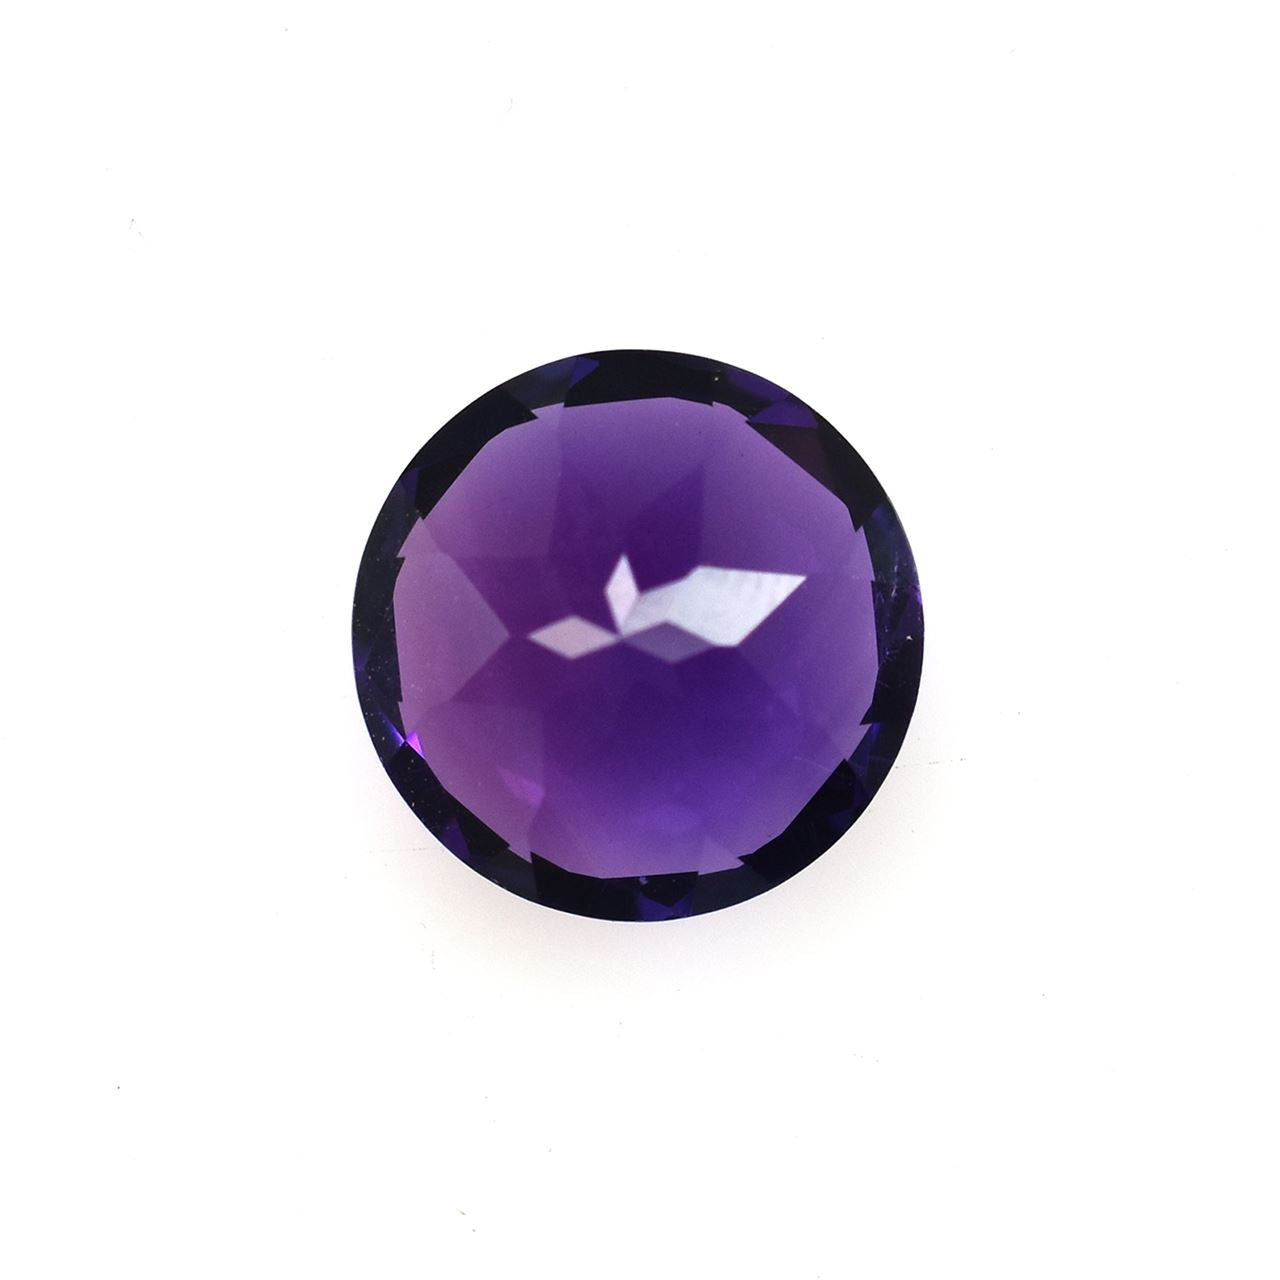 AFRICAN AMETHYST CUT ROUND (AAA/CLEAN) 10.00X10.00 MM 3.47 Cts.